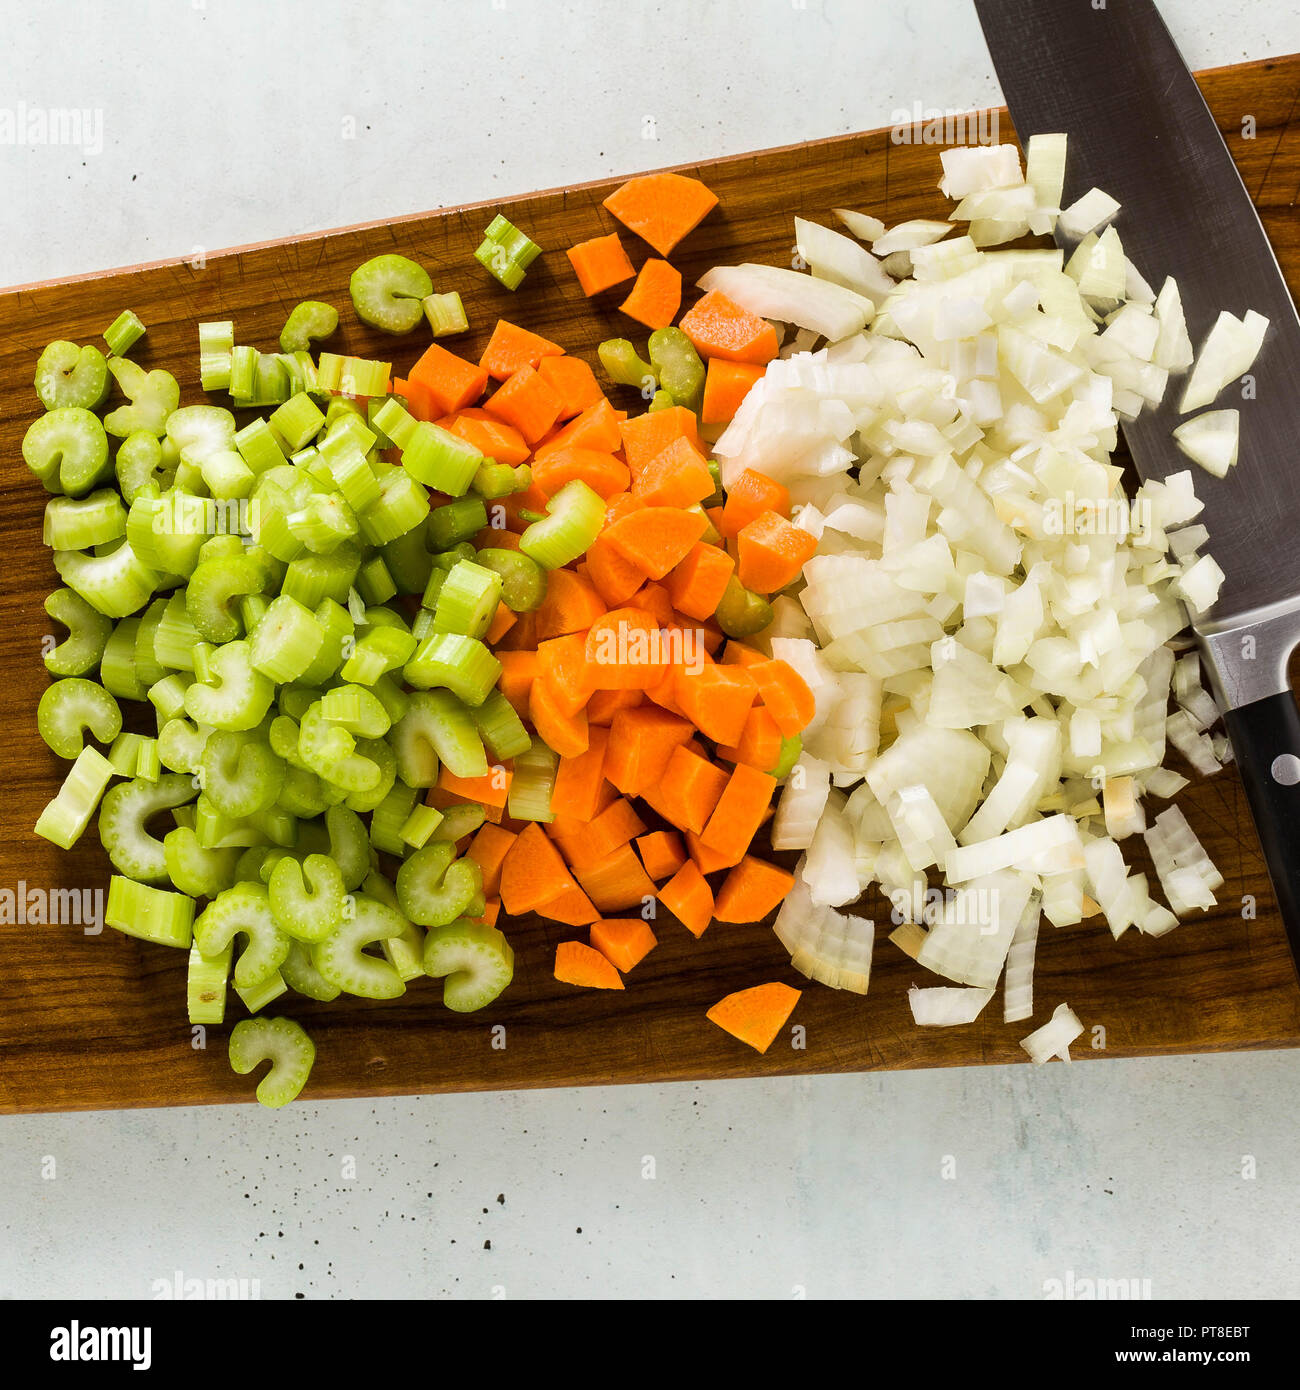 chopped vegetables and a chef's knife on a wooden cutting board. Basic cutting for restaurants or home cooking. Stock Photo